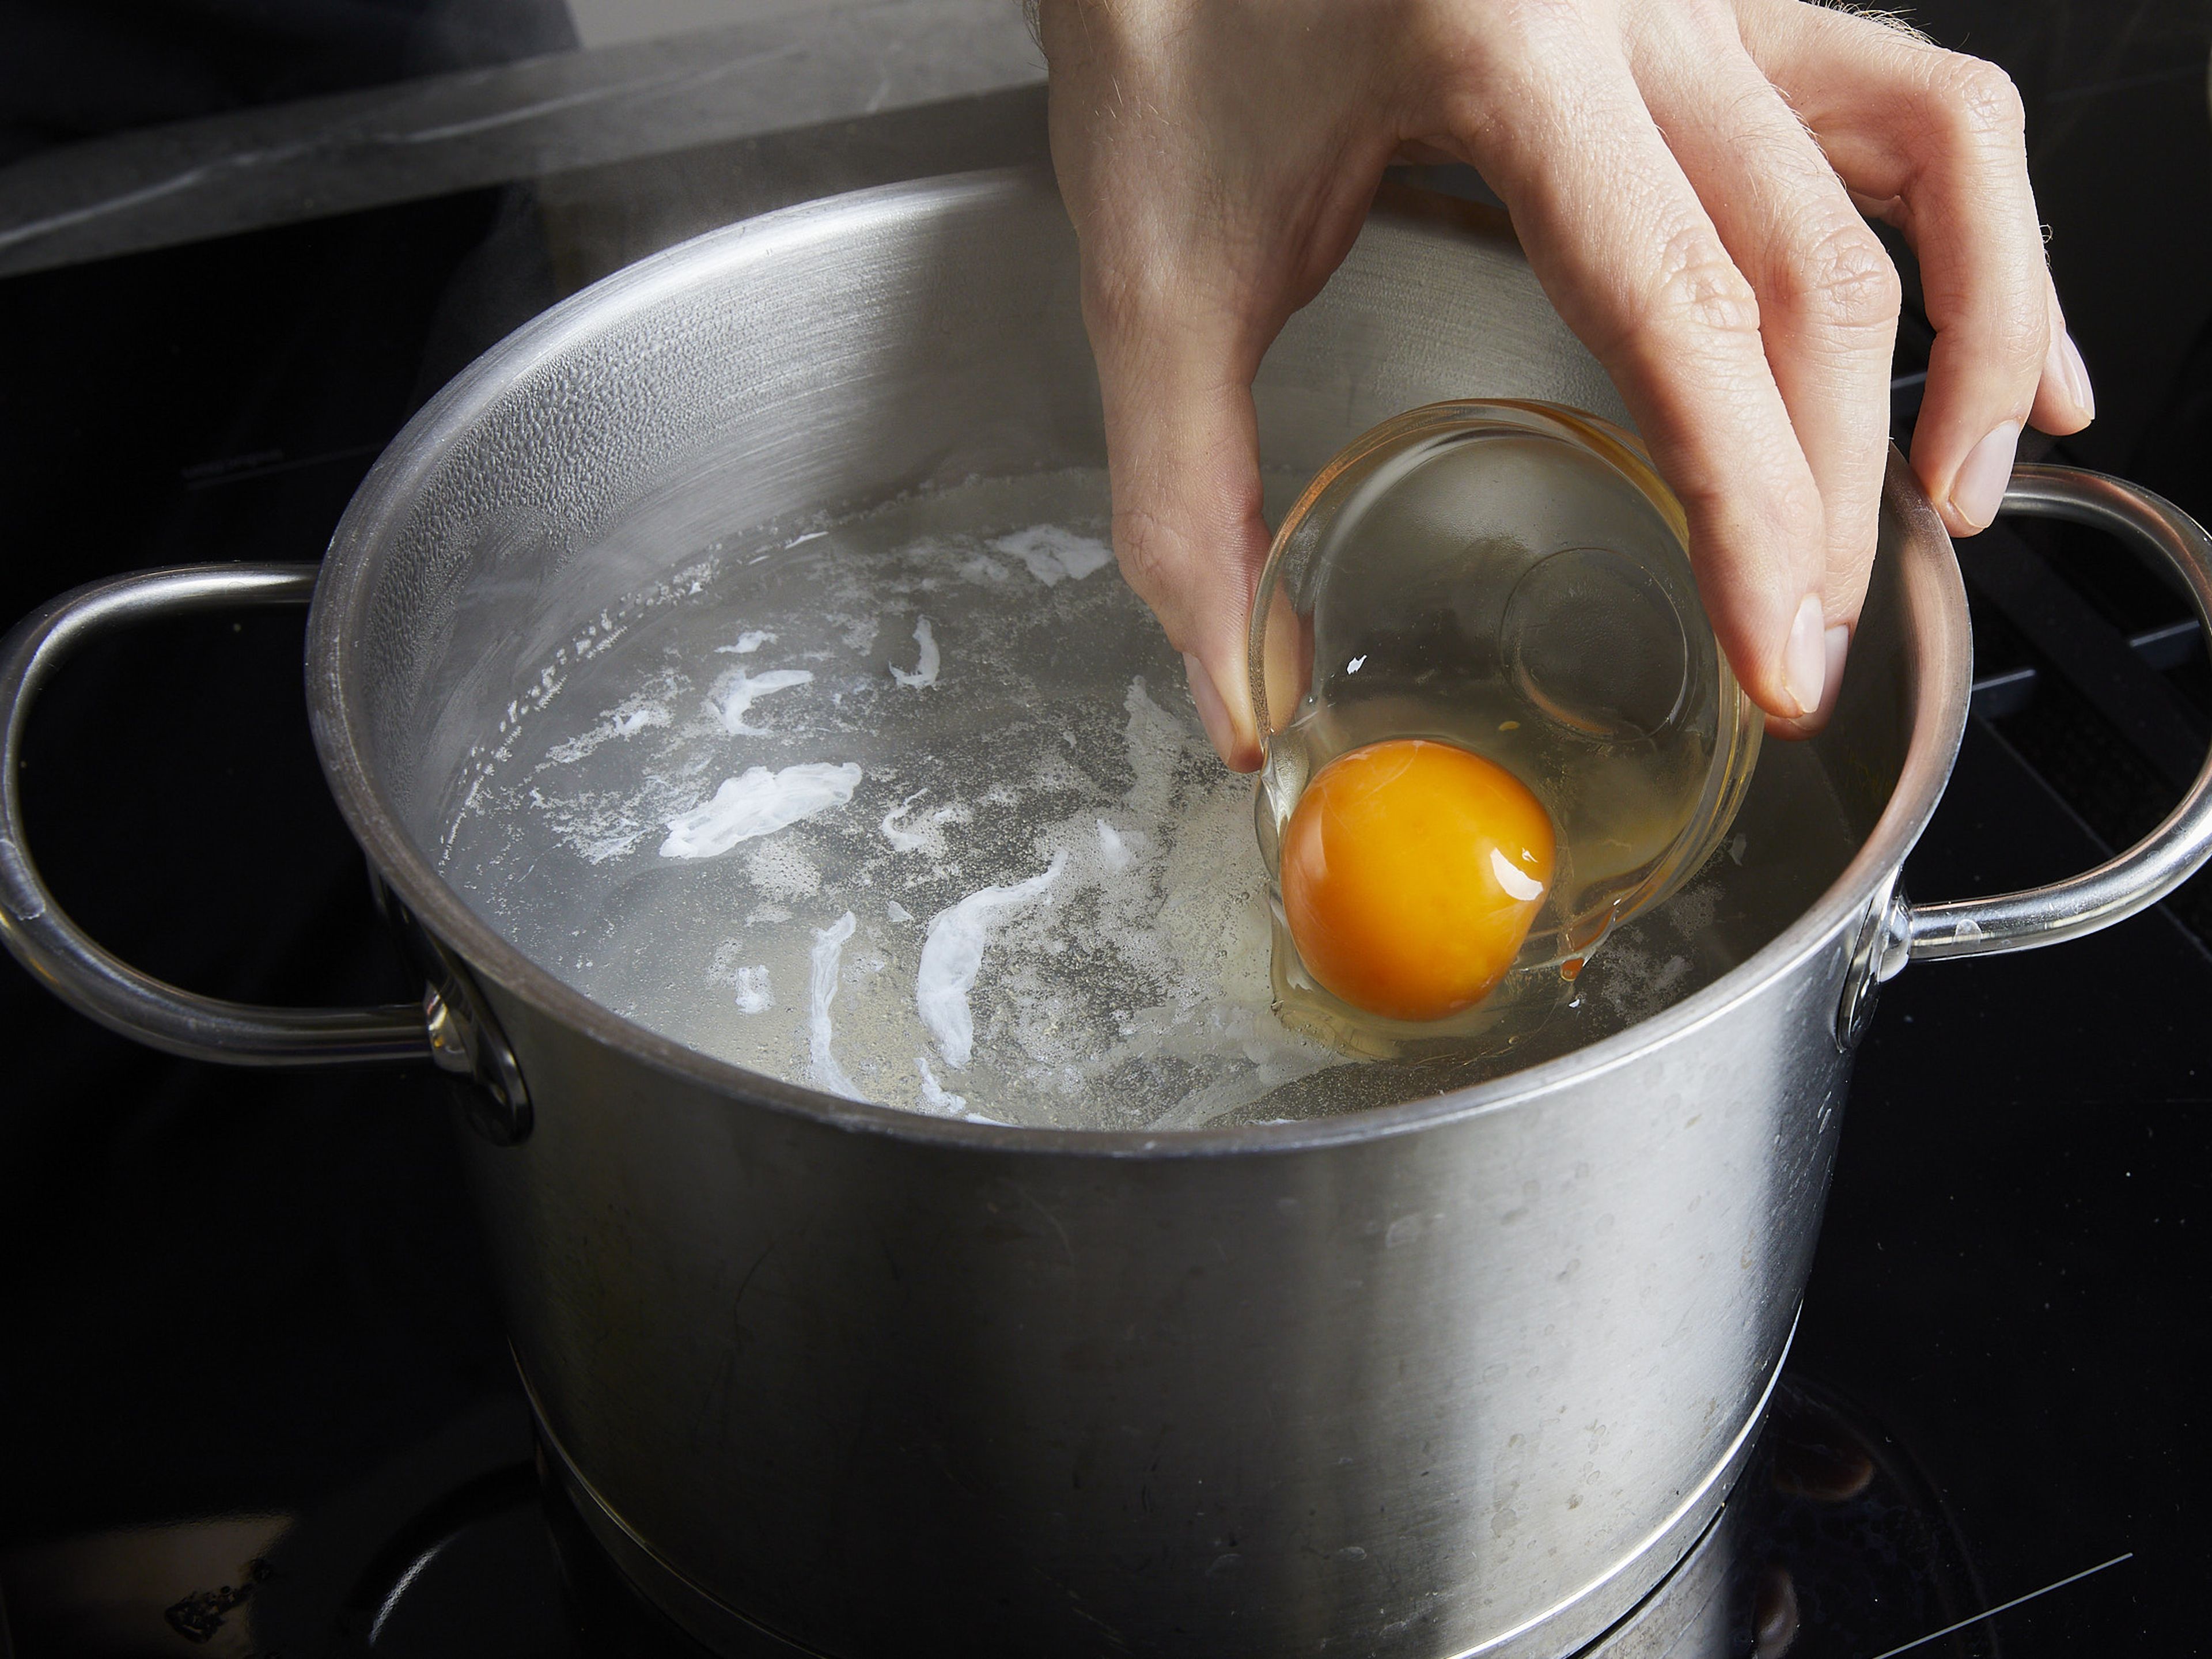 Now it’s time to poach your eggs. Fill a medium-sized pot with water and bring to a simmer (not a boil!). One by one, crack each egg into a fine mesh strainer to remove the watery part of the egg white and gently transfer to a small bowl. Gently tip each egg one by one into the pot and swirl the water with a spoon. Cook the eggs for approx. 3–4 min., until the egg whites are set, then remove with a slotted spoon or strainer. Repeat this step with the remaining eggs.